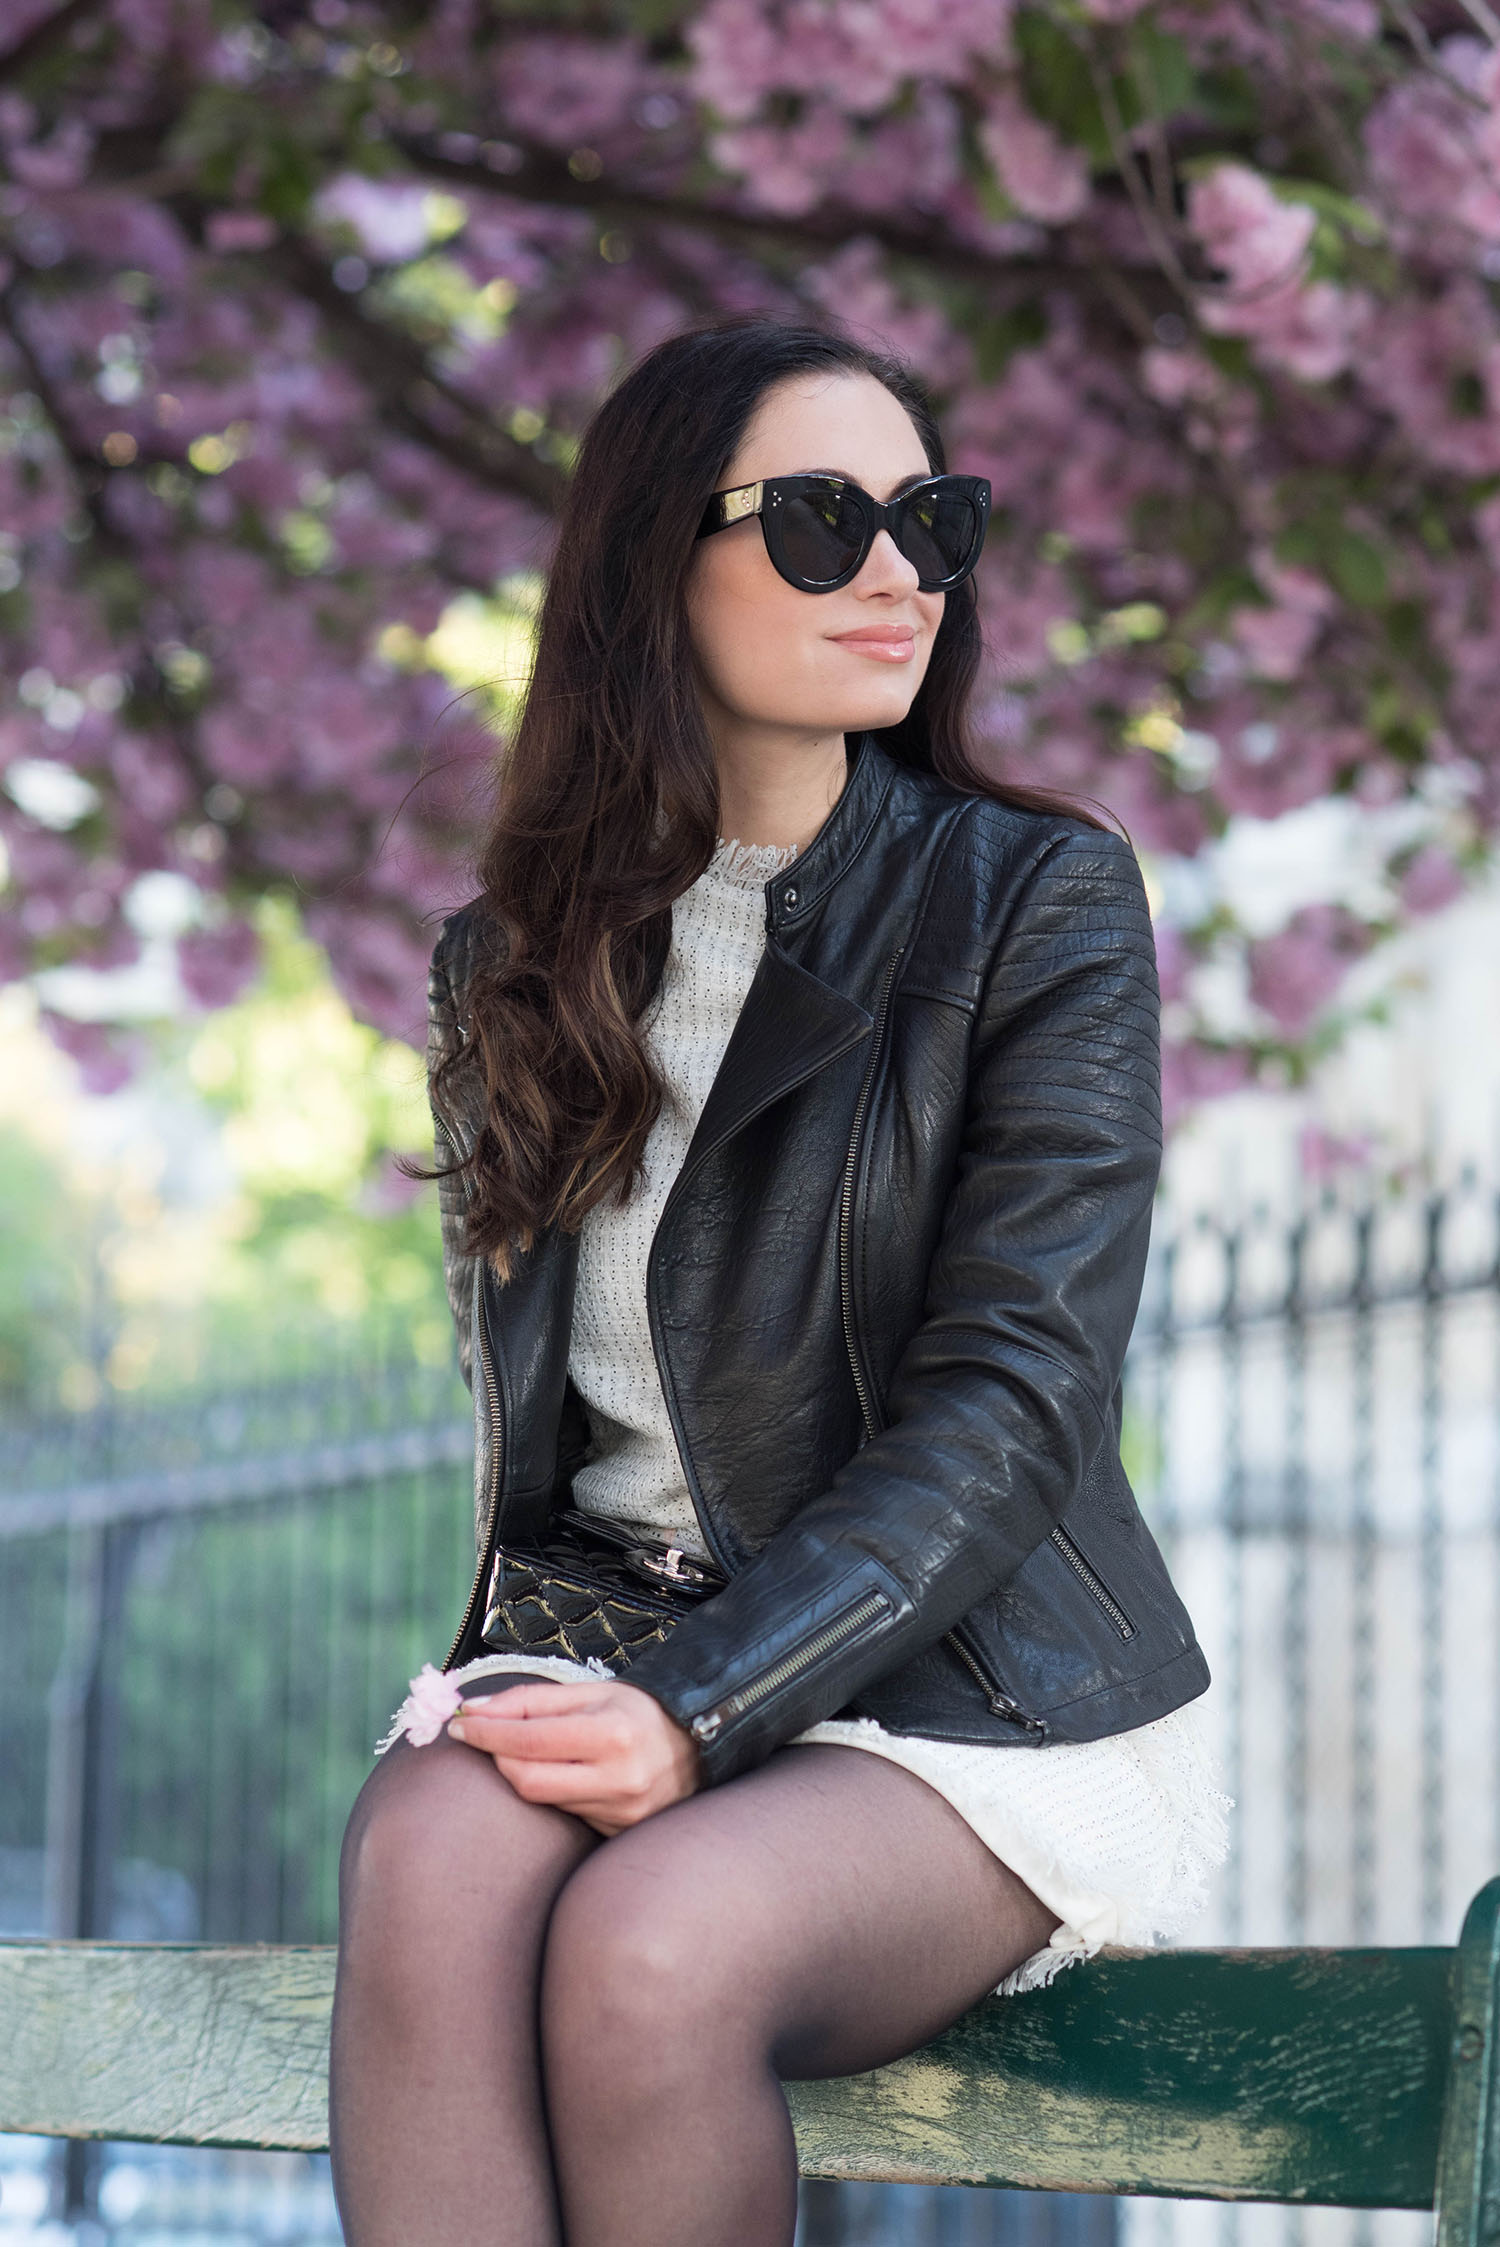 Portrait of style blogger Cee Fardoe of Coco & Vera, wearing a leather jacket and Celine sunglasses